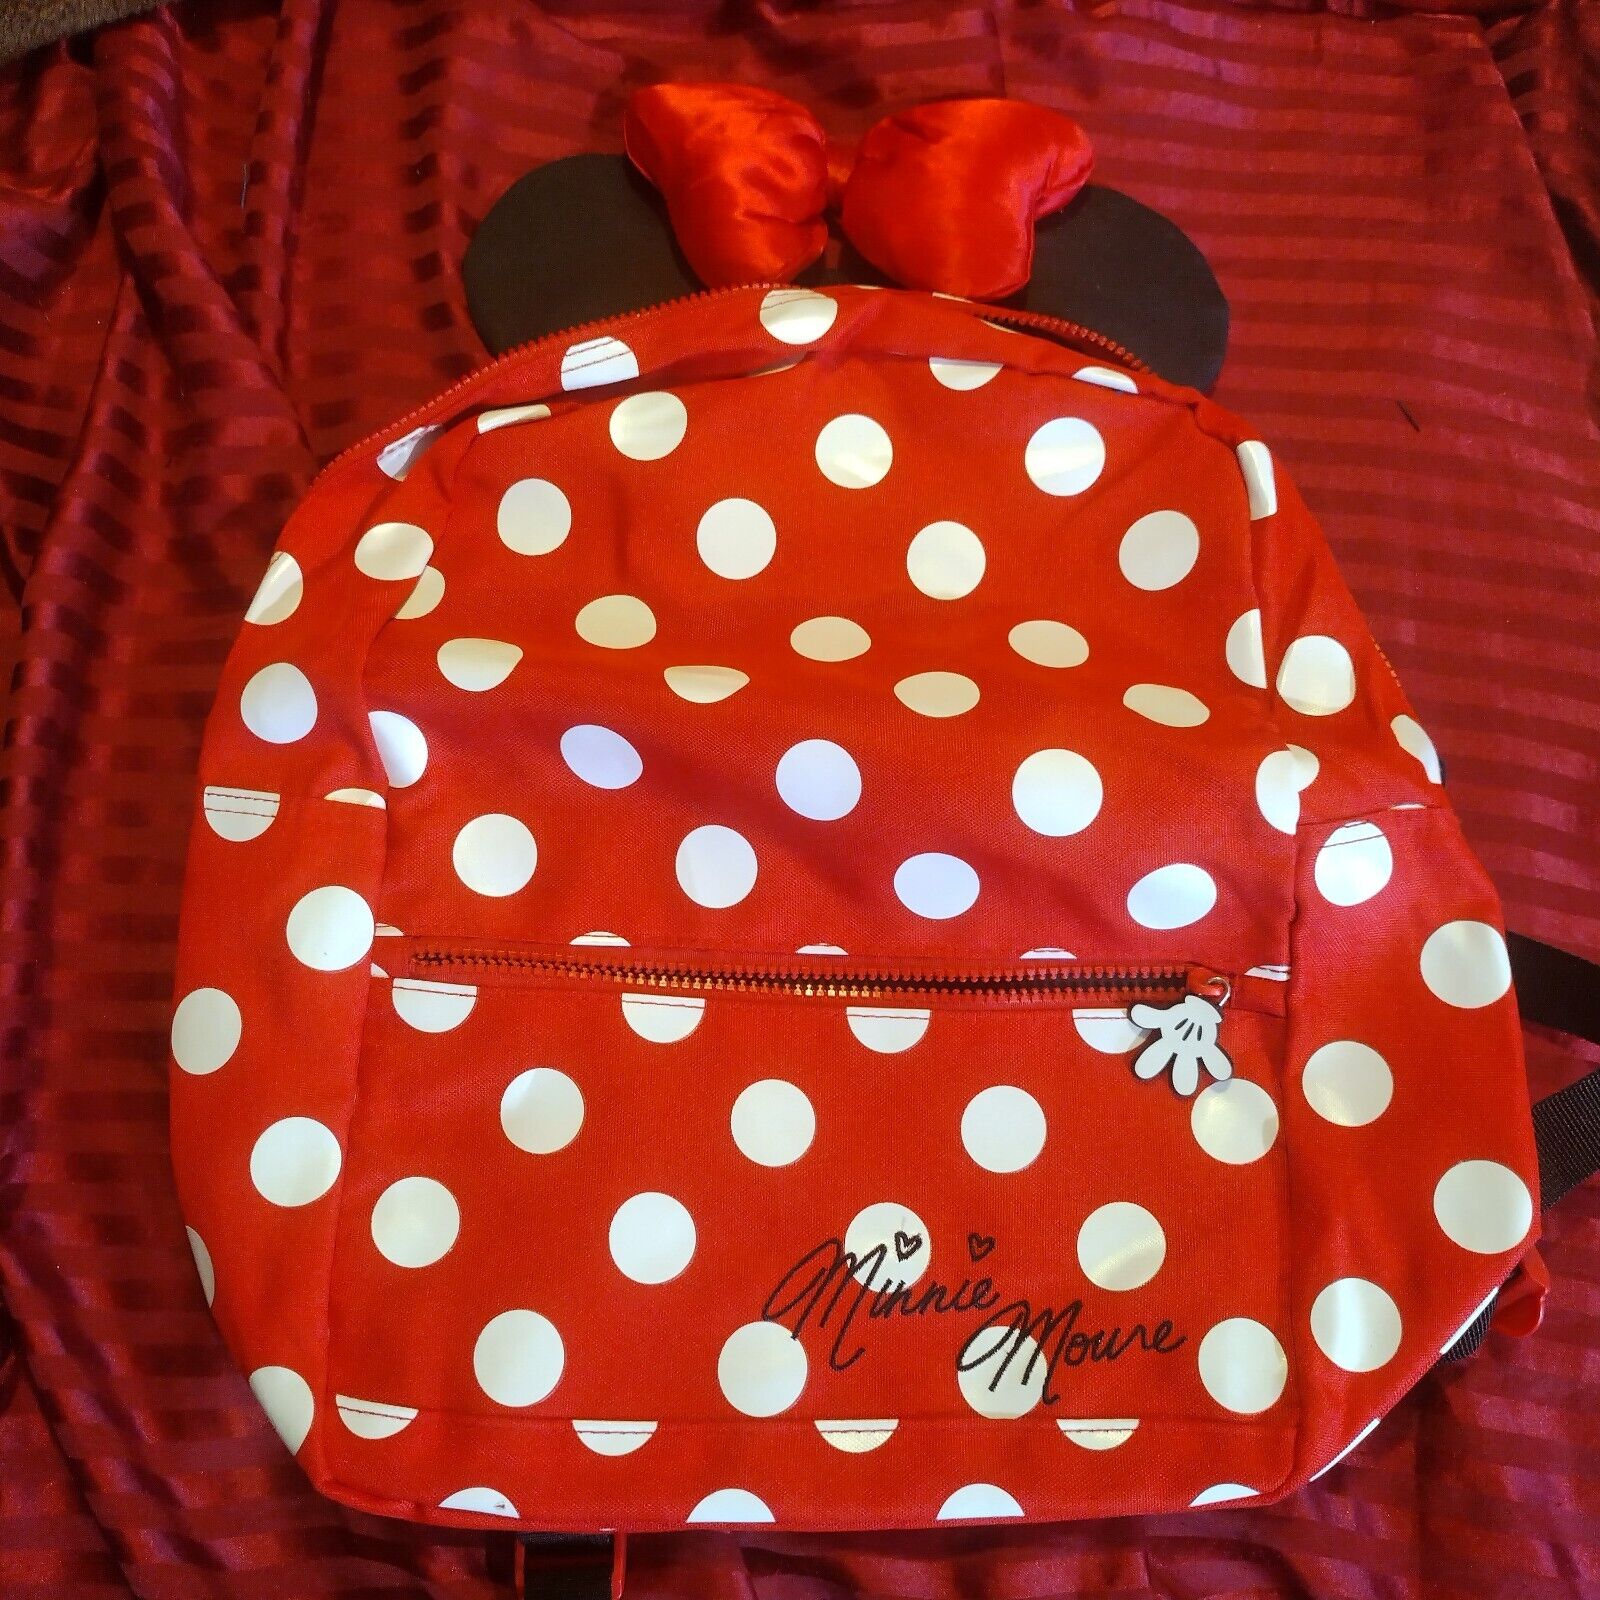 Disneyland Minnie Mouse Large Polka Dot Backpack w/ Ears & Bow. NEVER USED